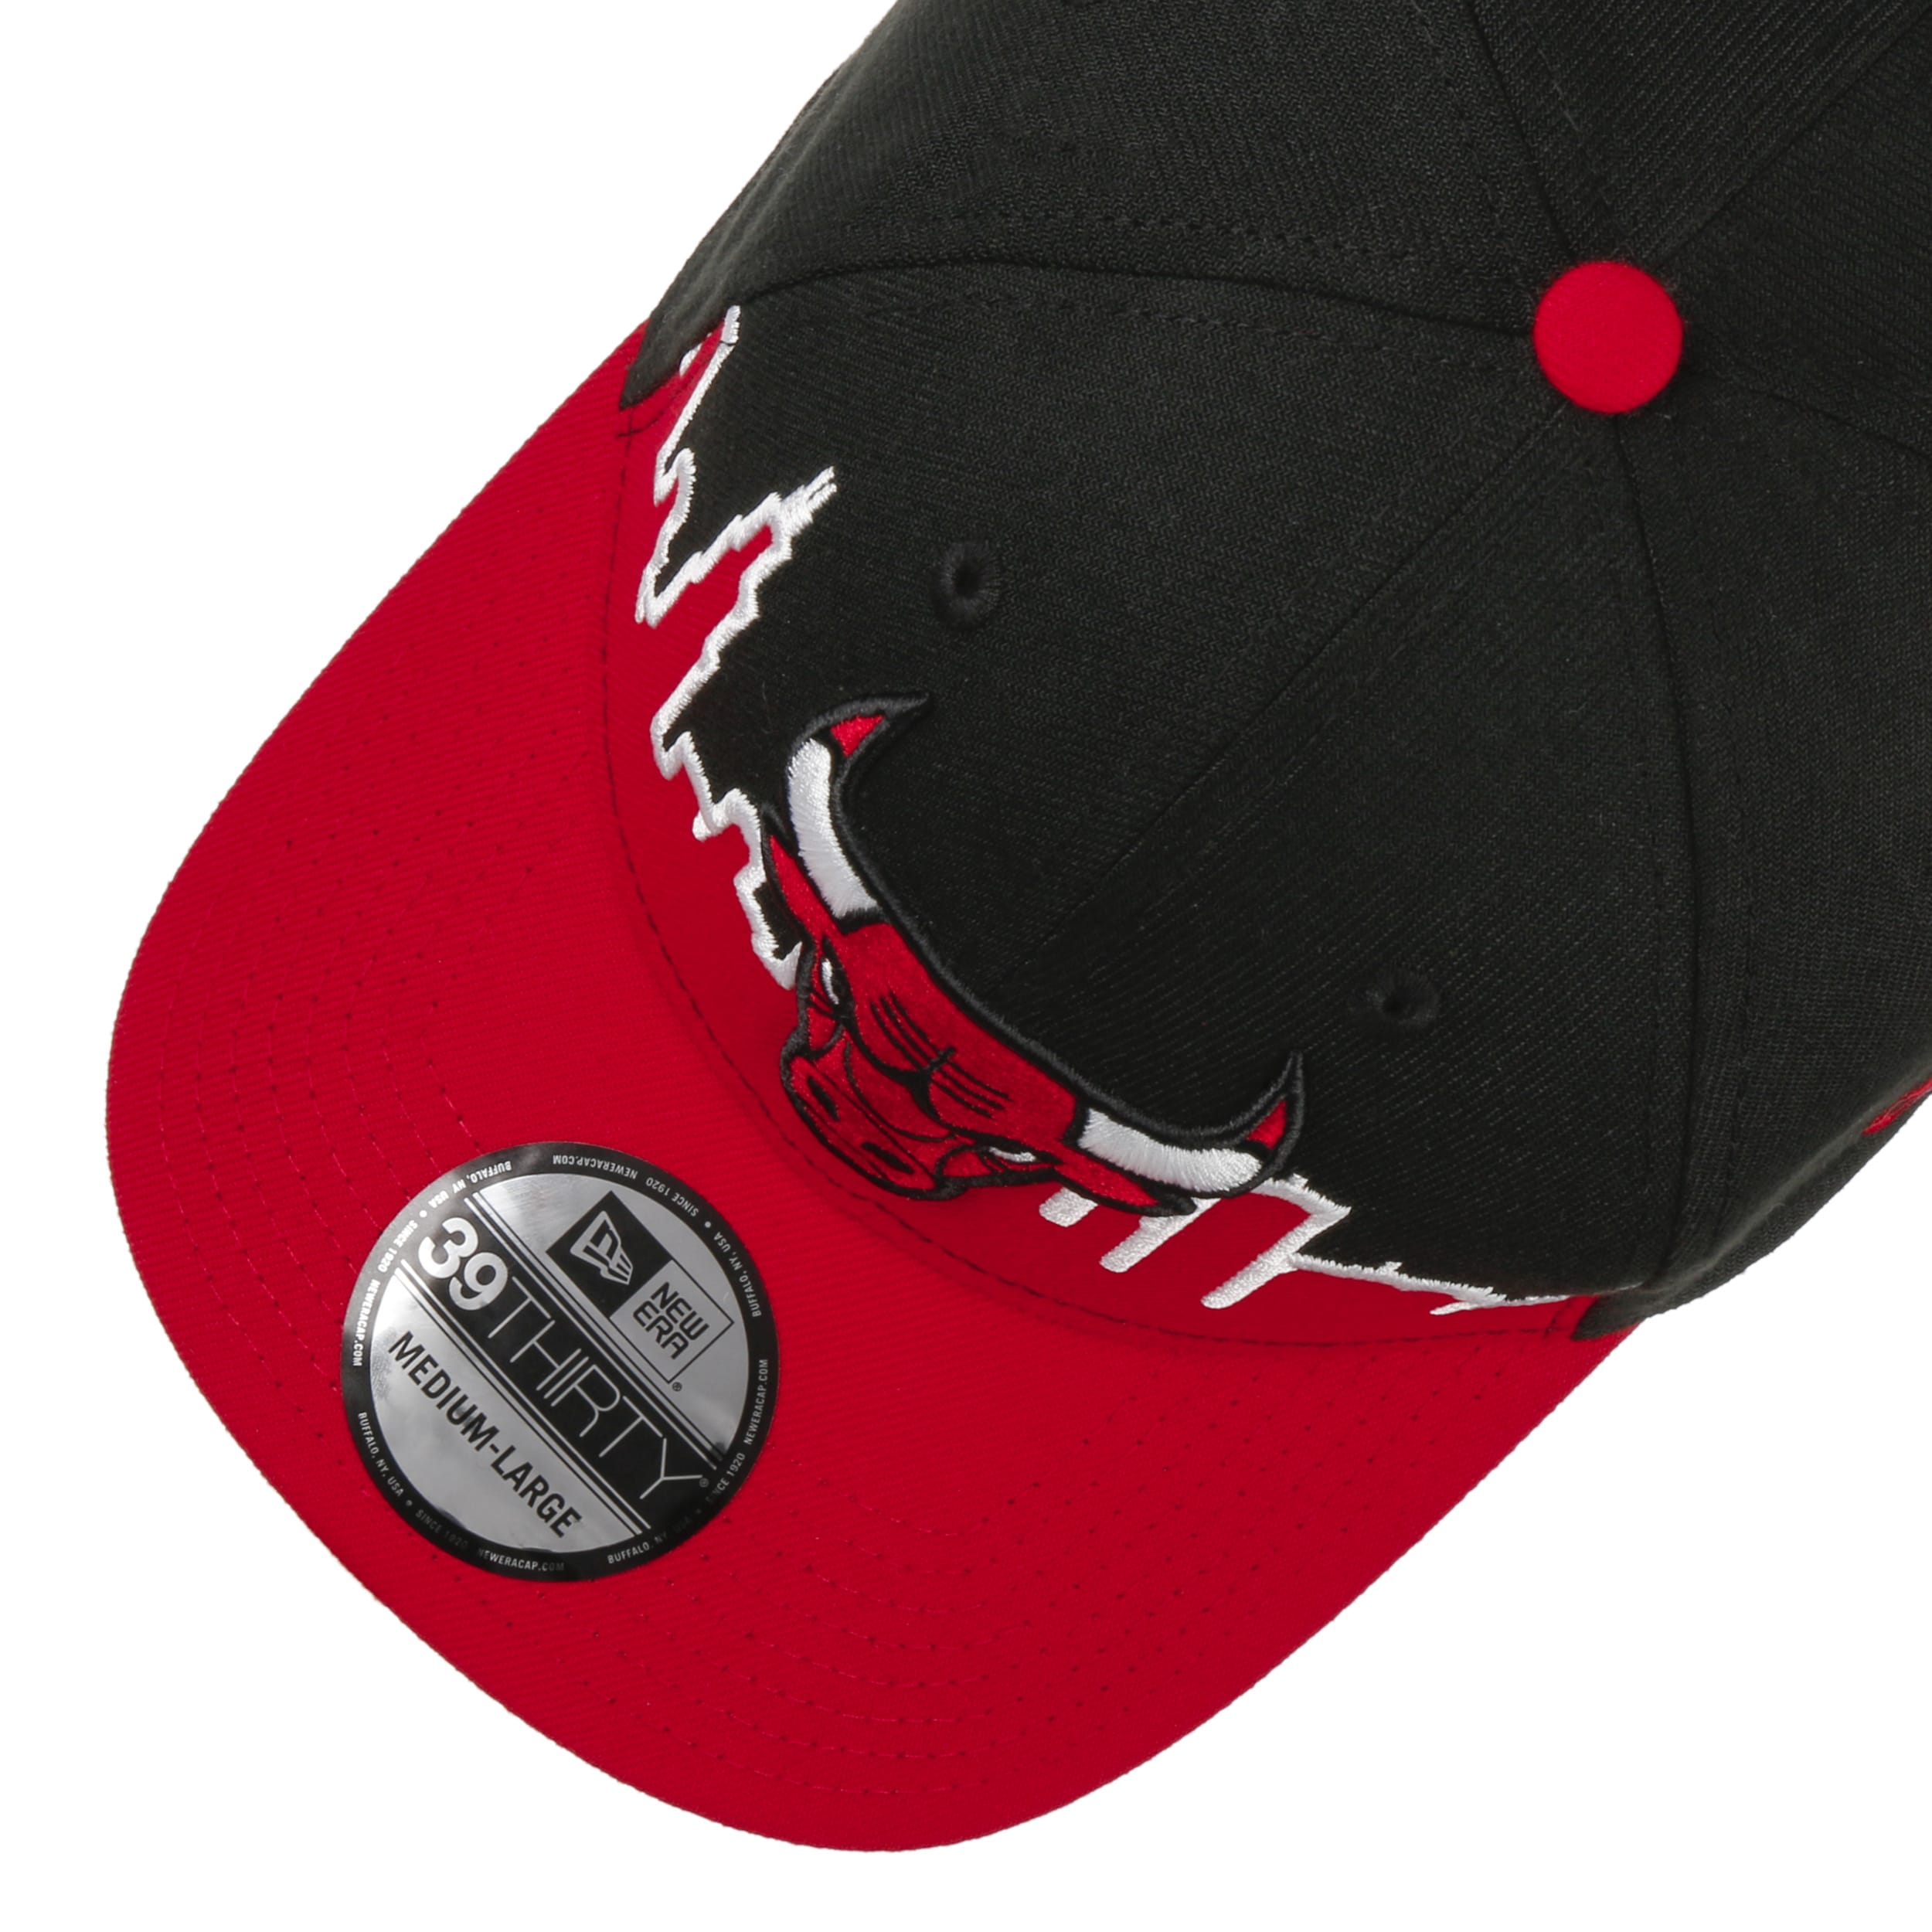 Chicago Bulls 2T XL-LOGO Black-Red Fitted Hat